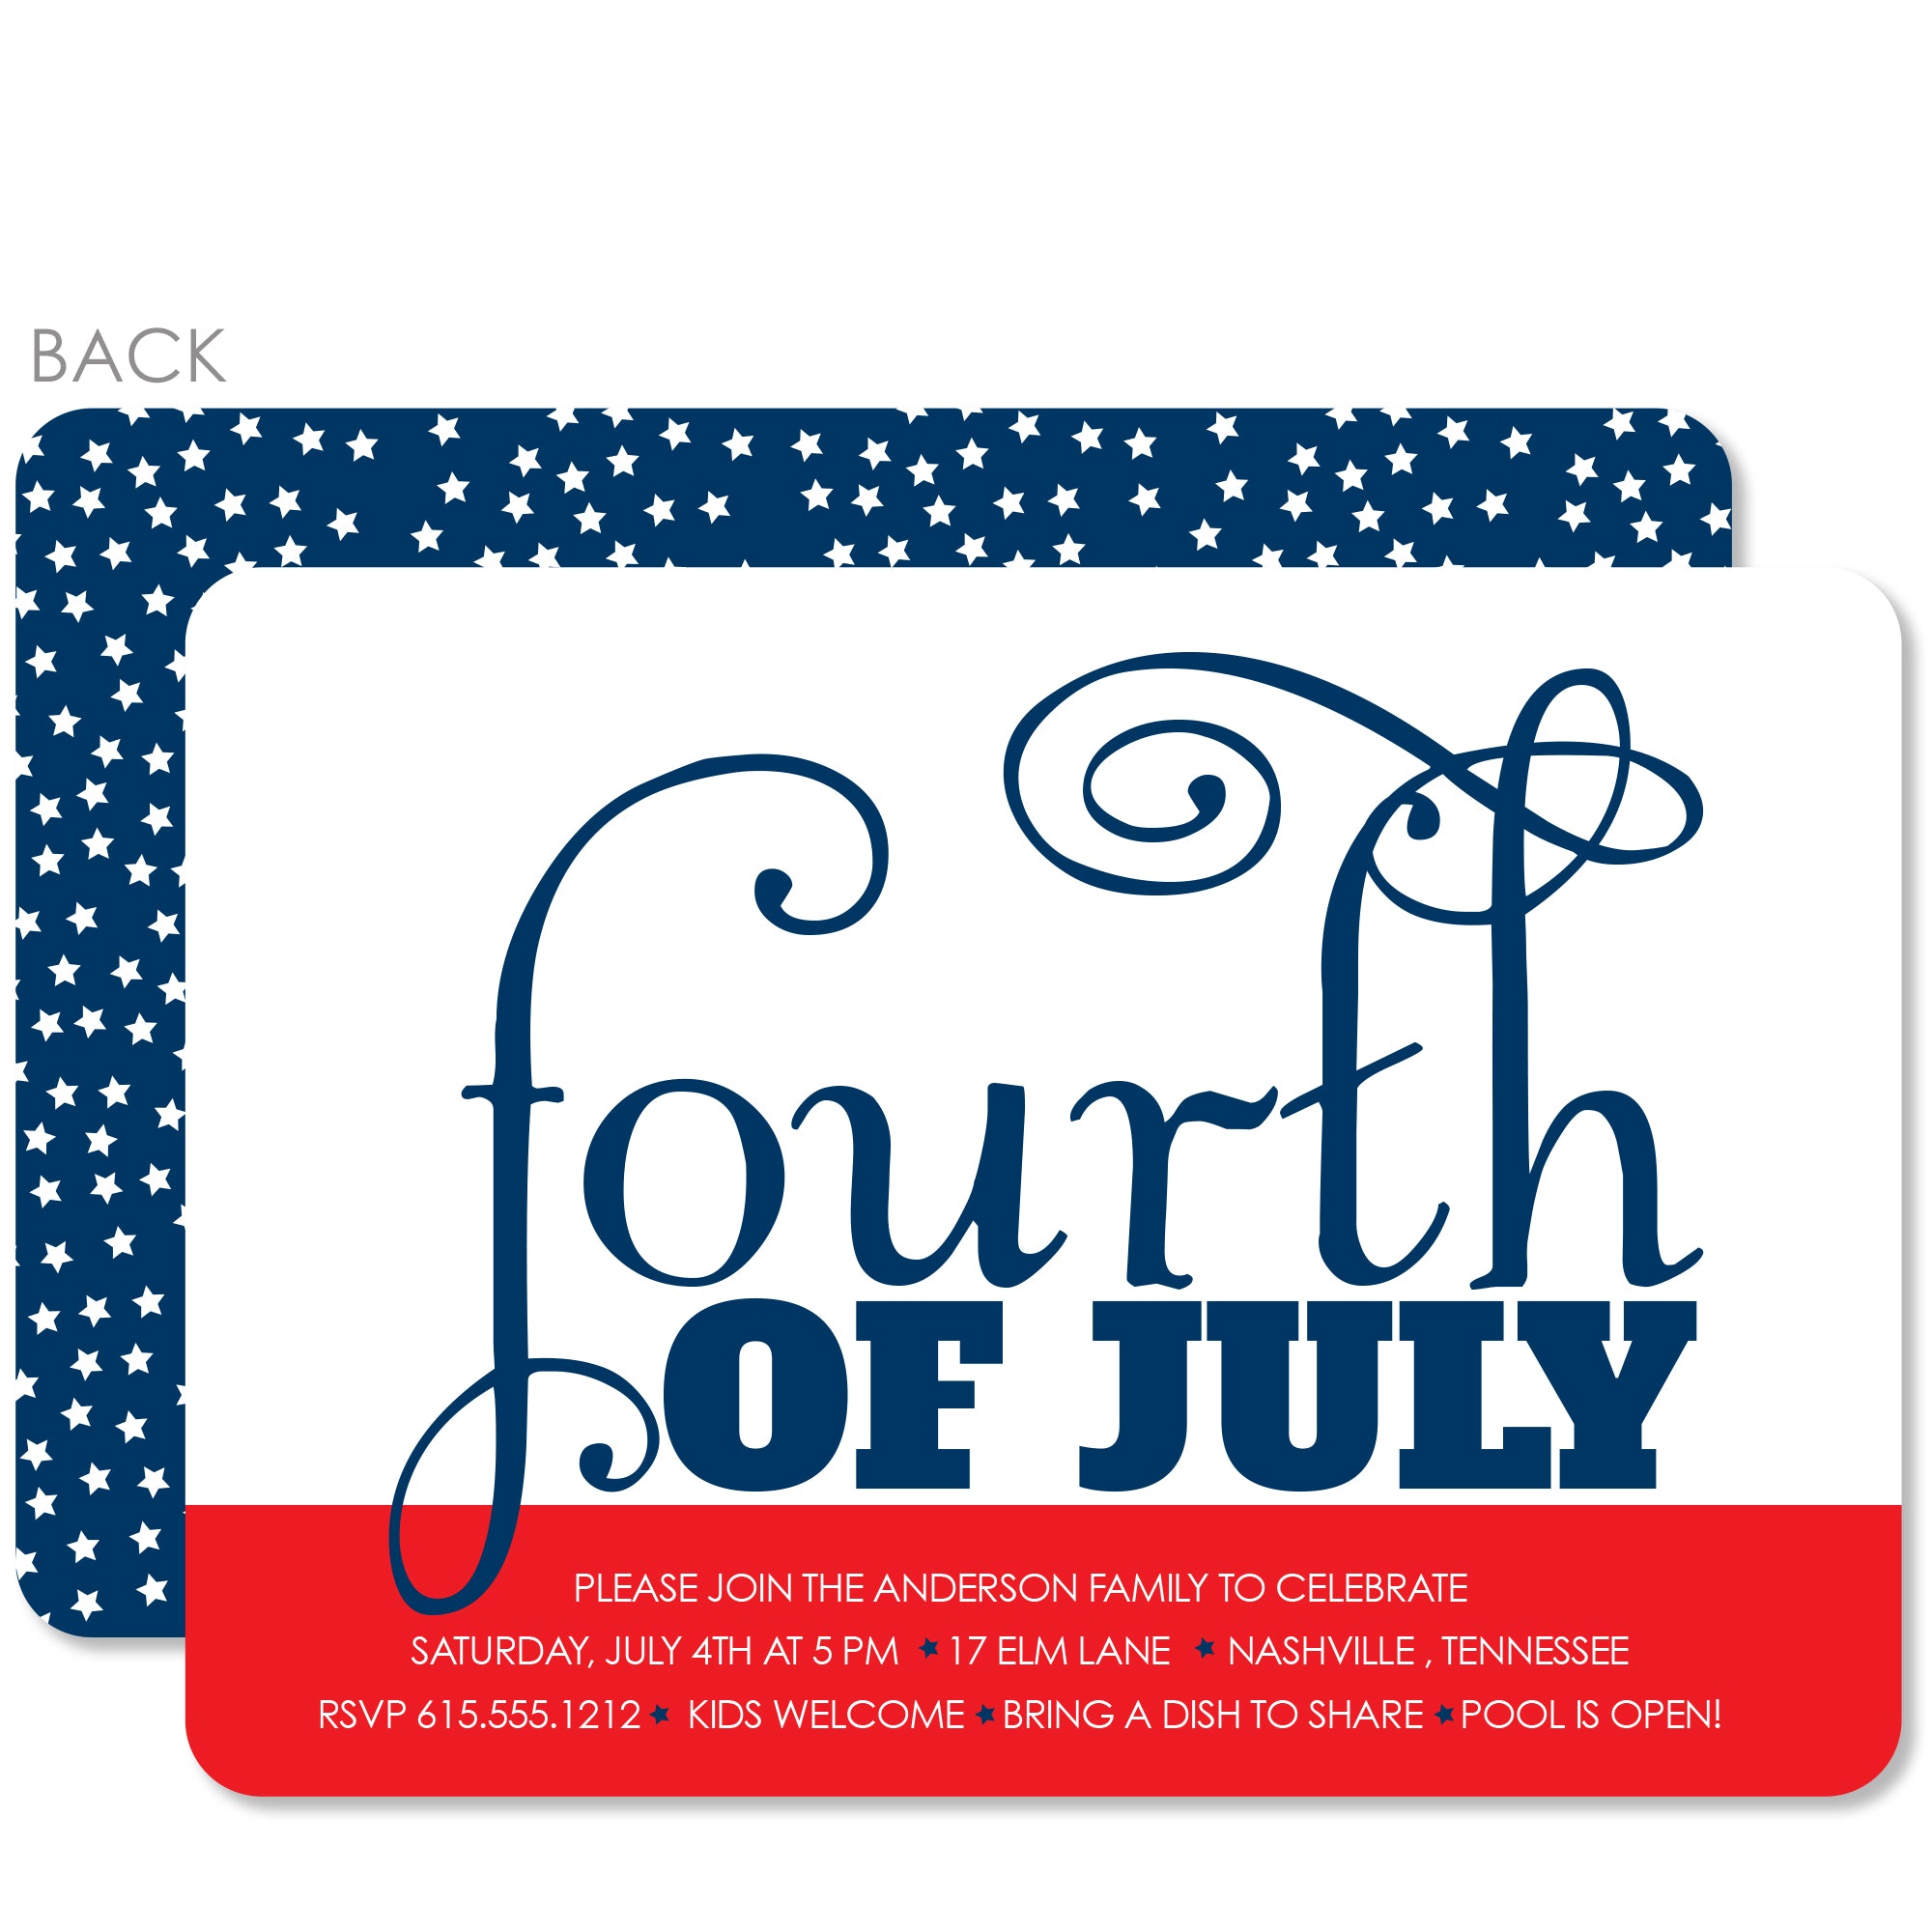 4TH OF JULY Party Invitation, Starry Sky, PIPSY.COM, Premium heavyweight Printed on Cardstock